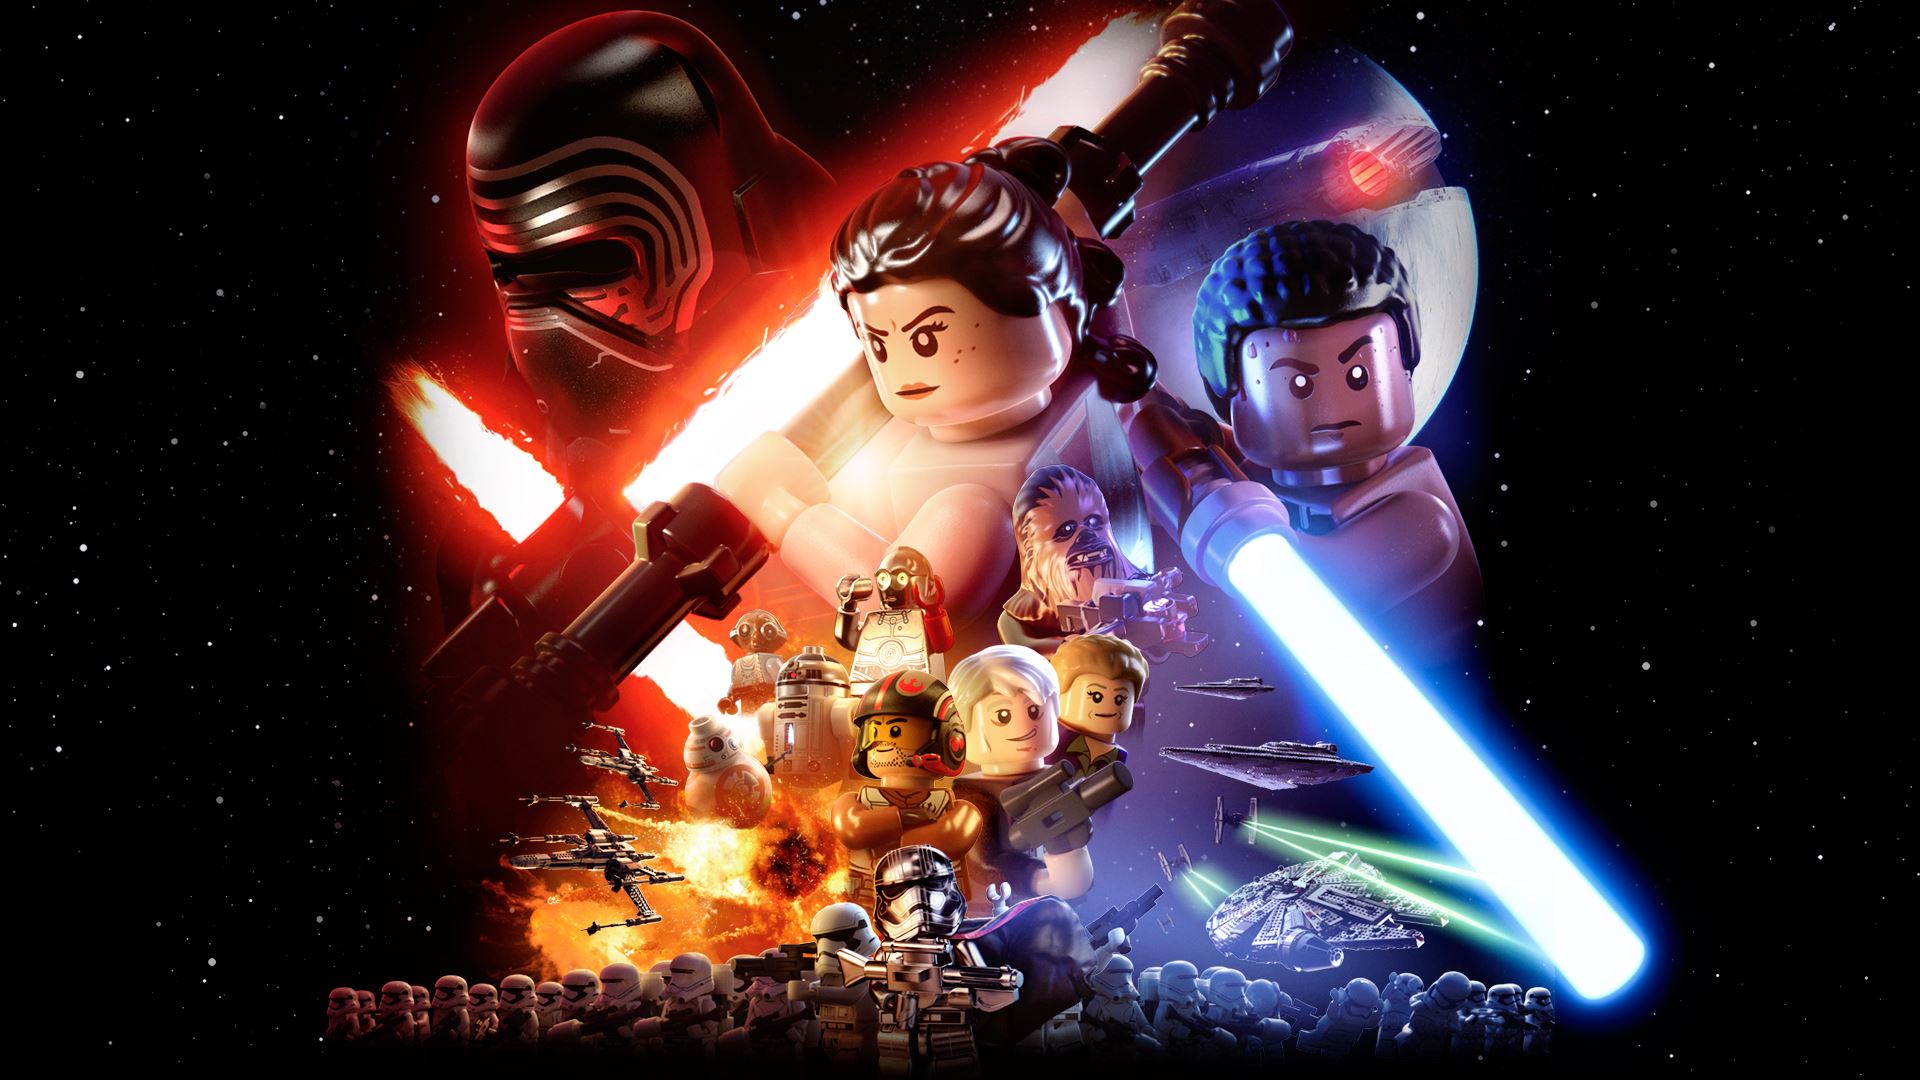 Lego Star Wars The Force Awakens Hd Wallpapers 7wallpapers Net